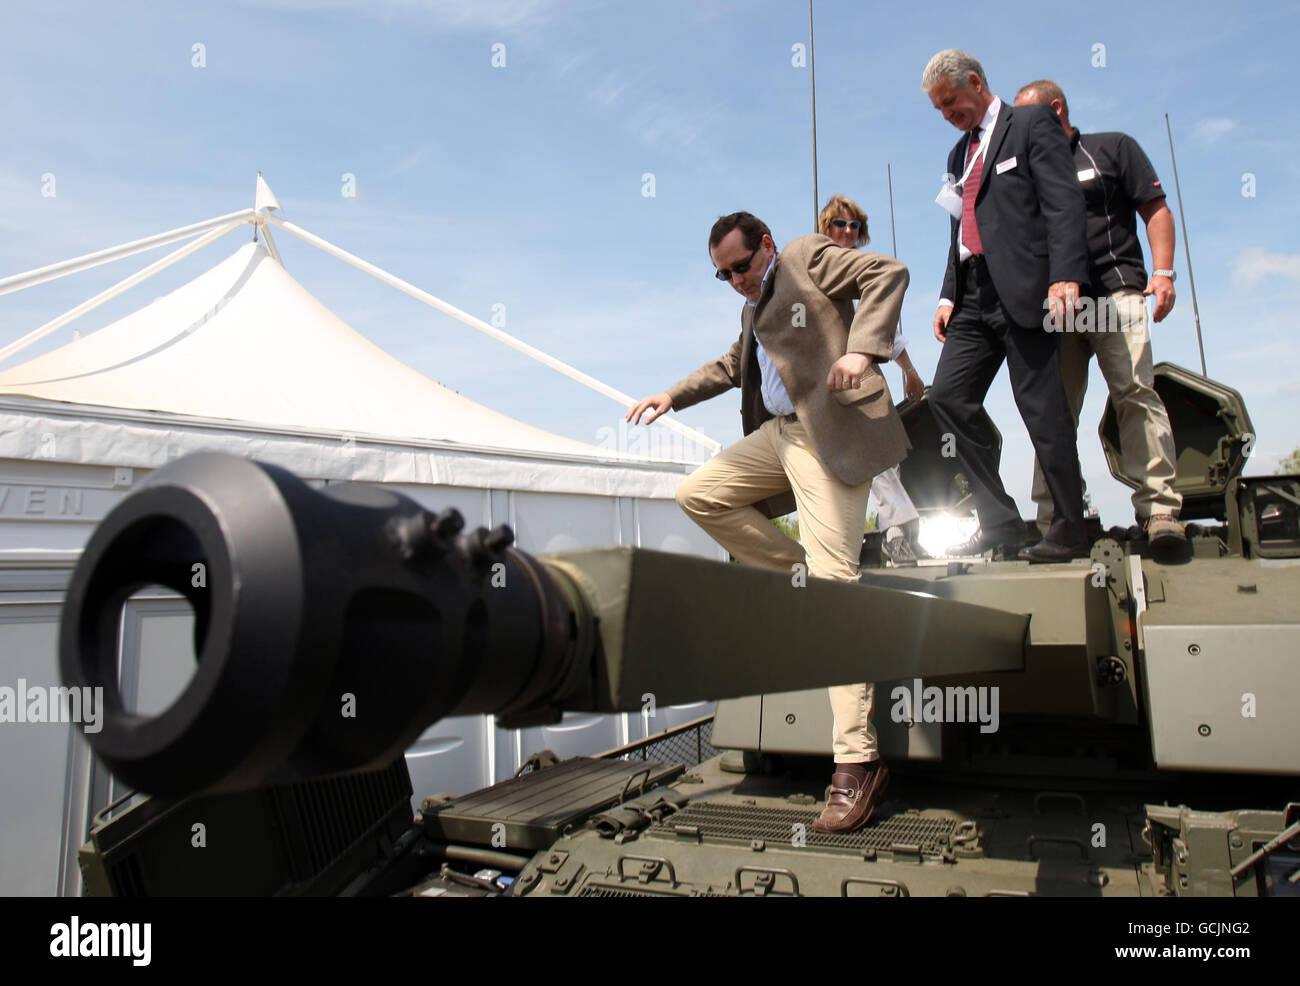 Peter Luff, Minister for Defence Equipment, Support and Technology, climbs out of a Warrior Tank during Defence Vehicle Dynamic (DVD) 2010, a showcase of military equipment at the Millbrook Proving Ground in Bedfordshire. Stock Photo